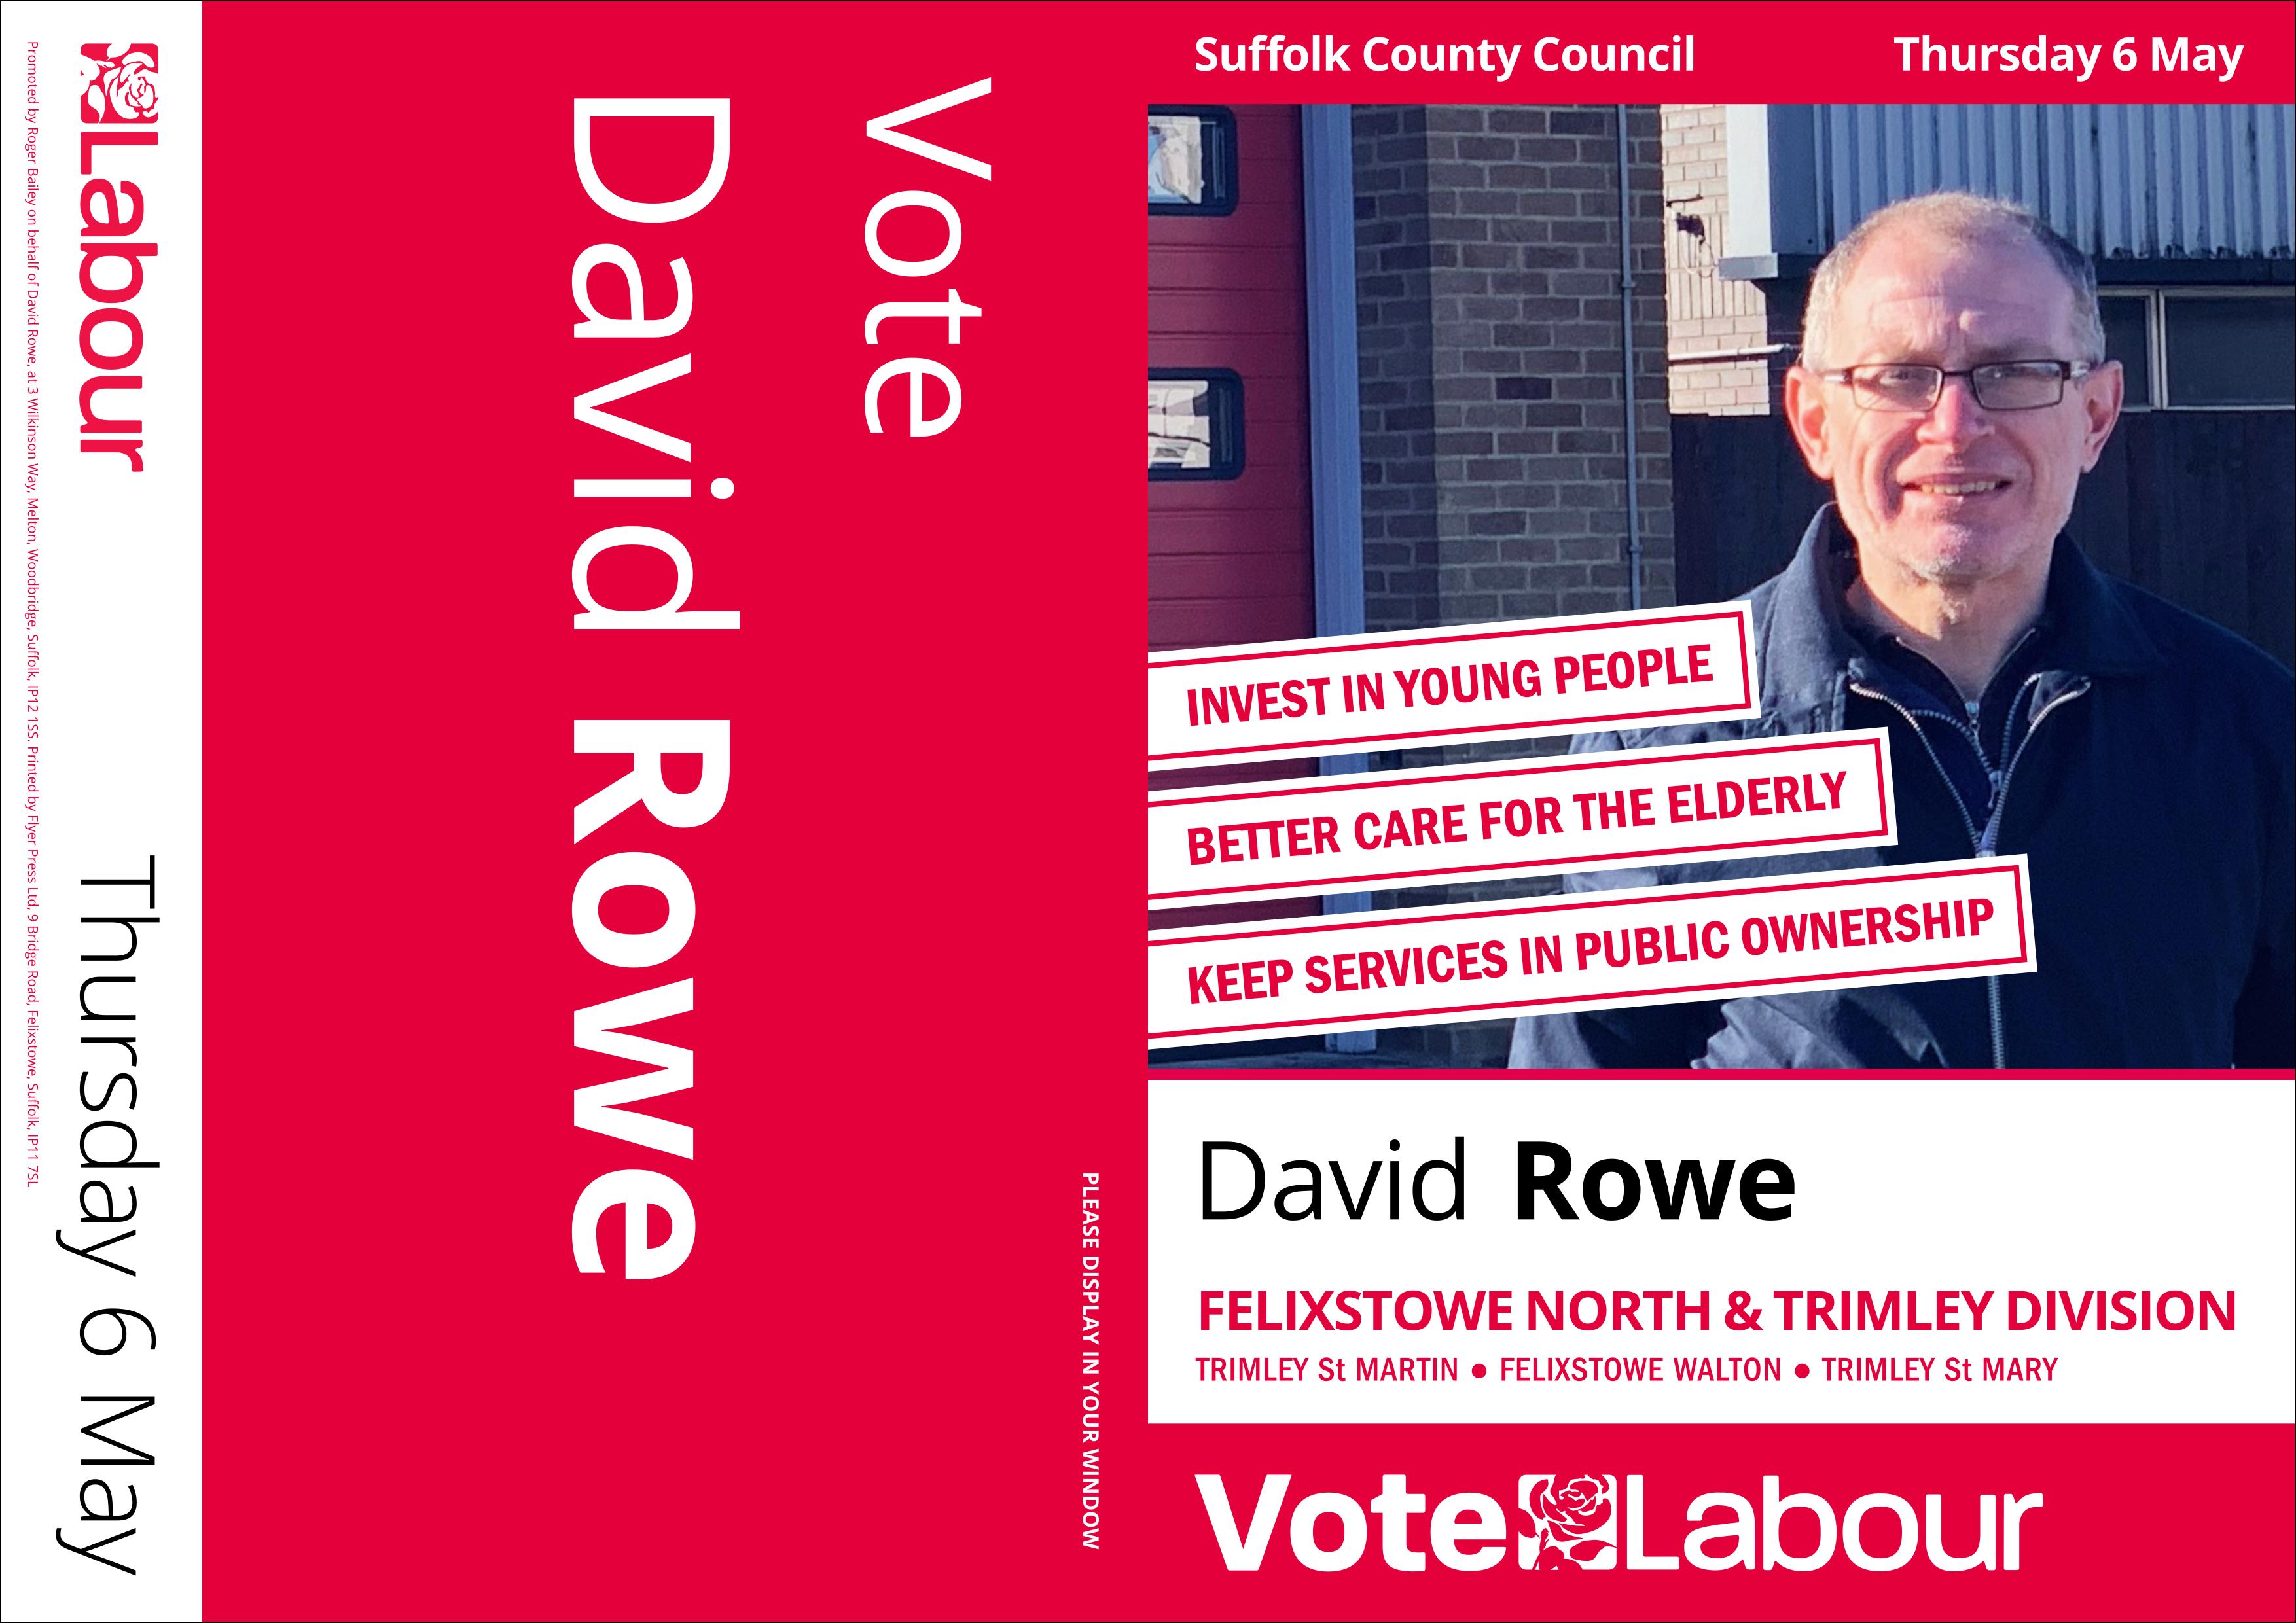 David Rowe election leaflet Felixstowe North and Trimley division - front and back pages